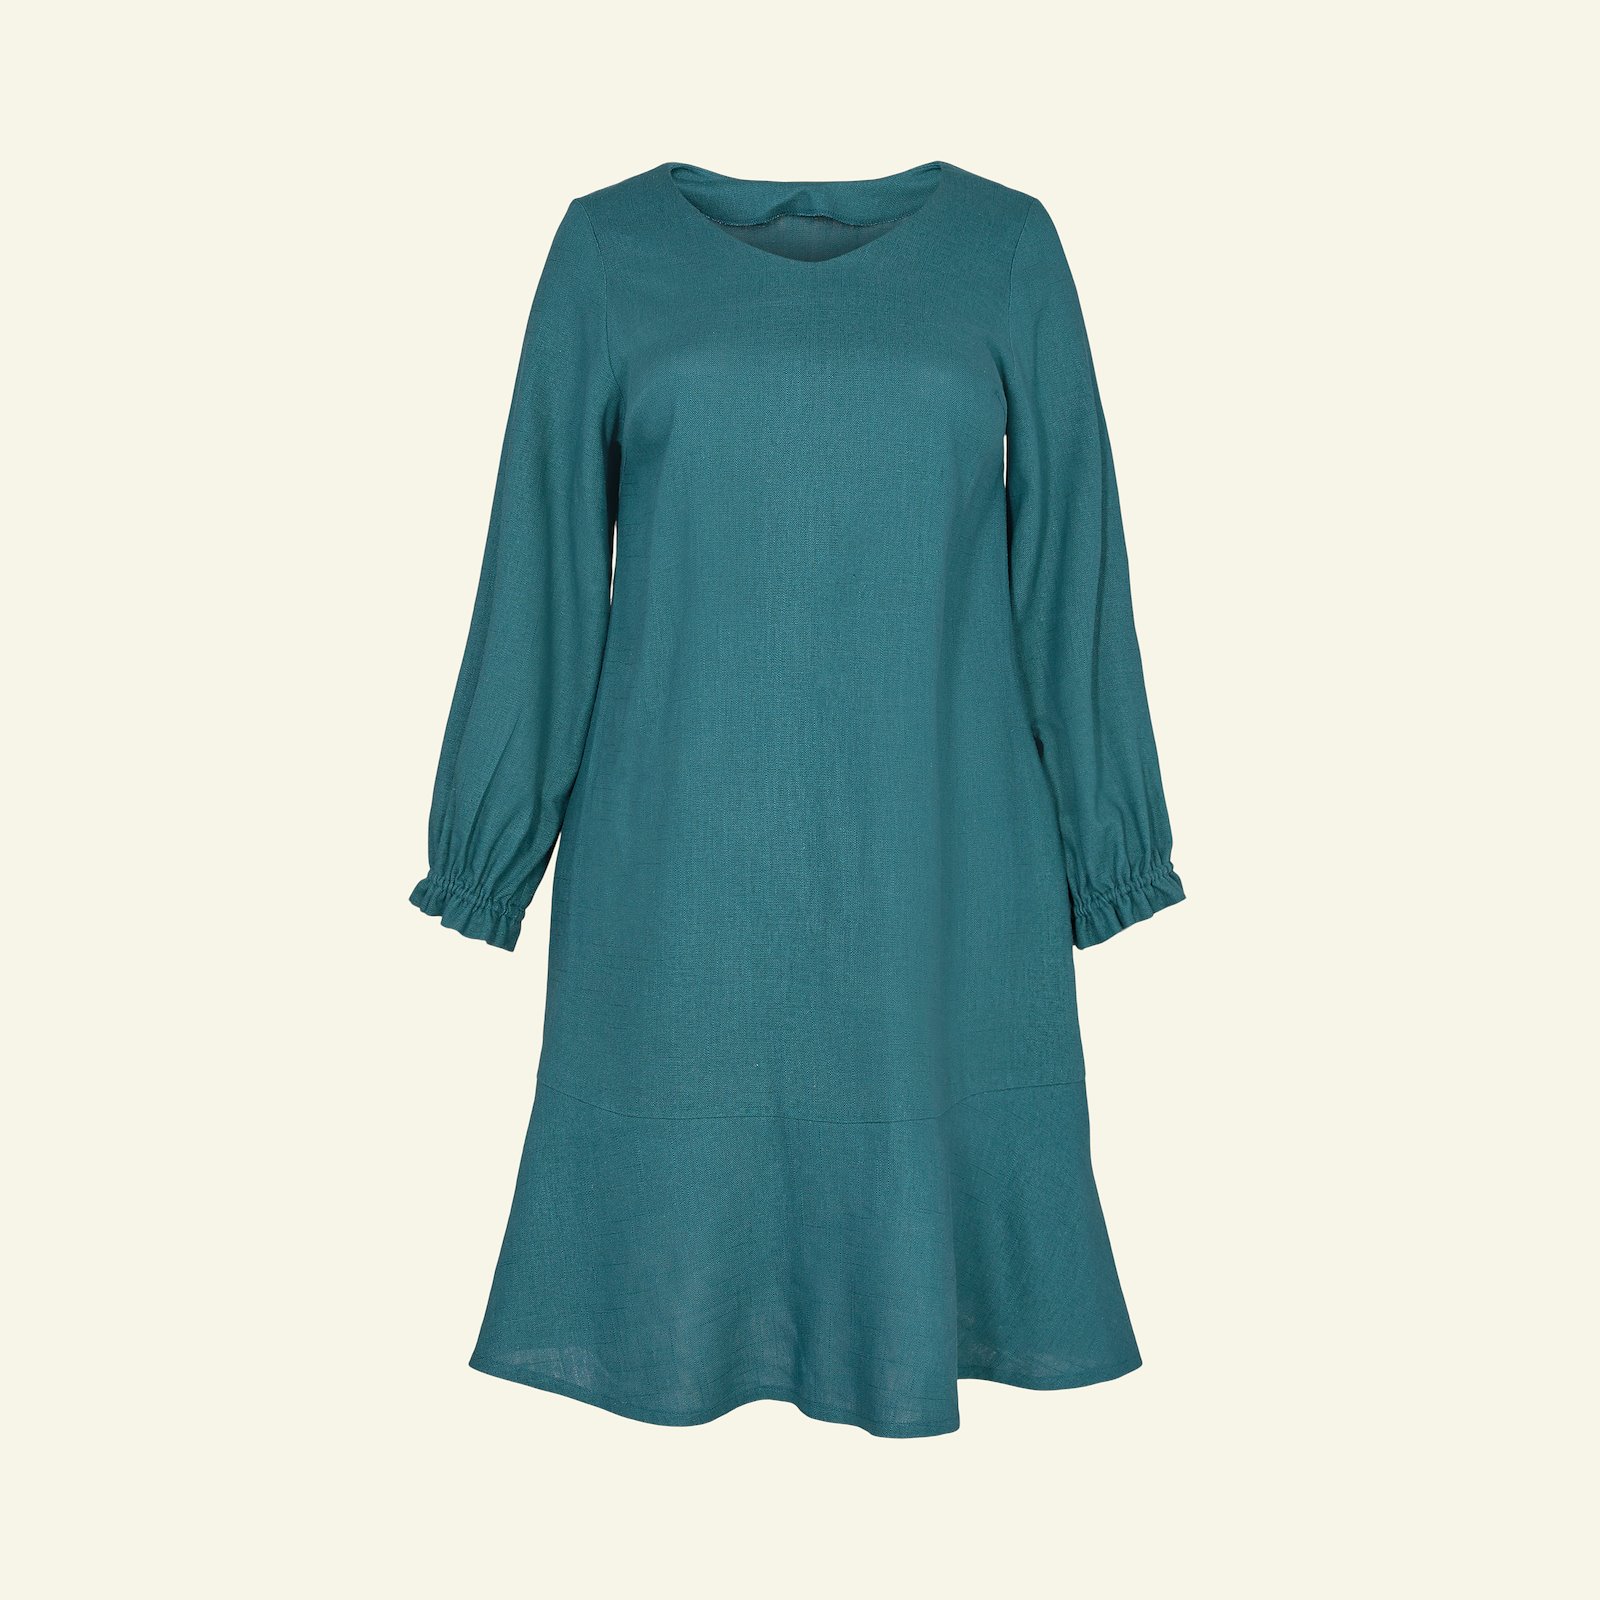 Dress with long and short sleeves, 52/24 p73018_410129_sskit